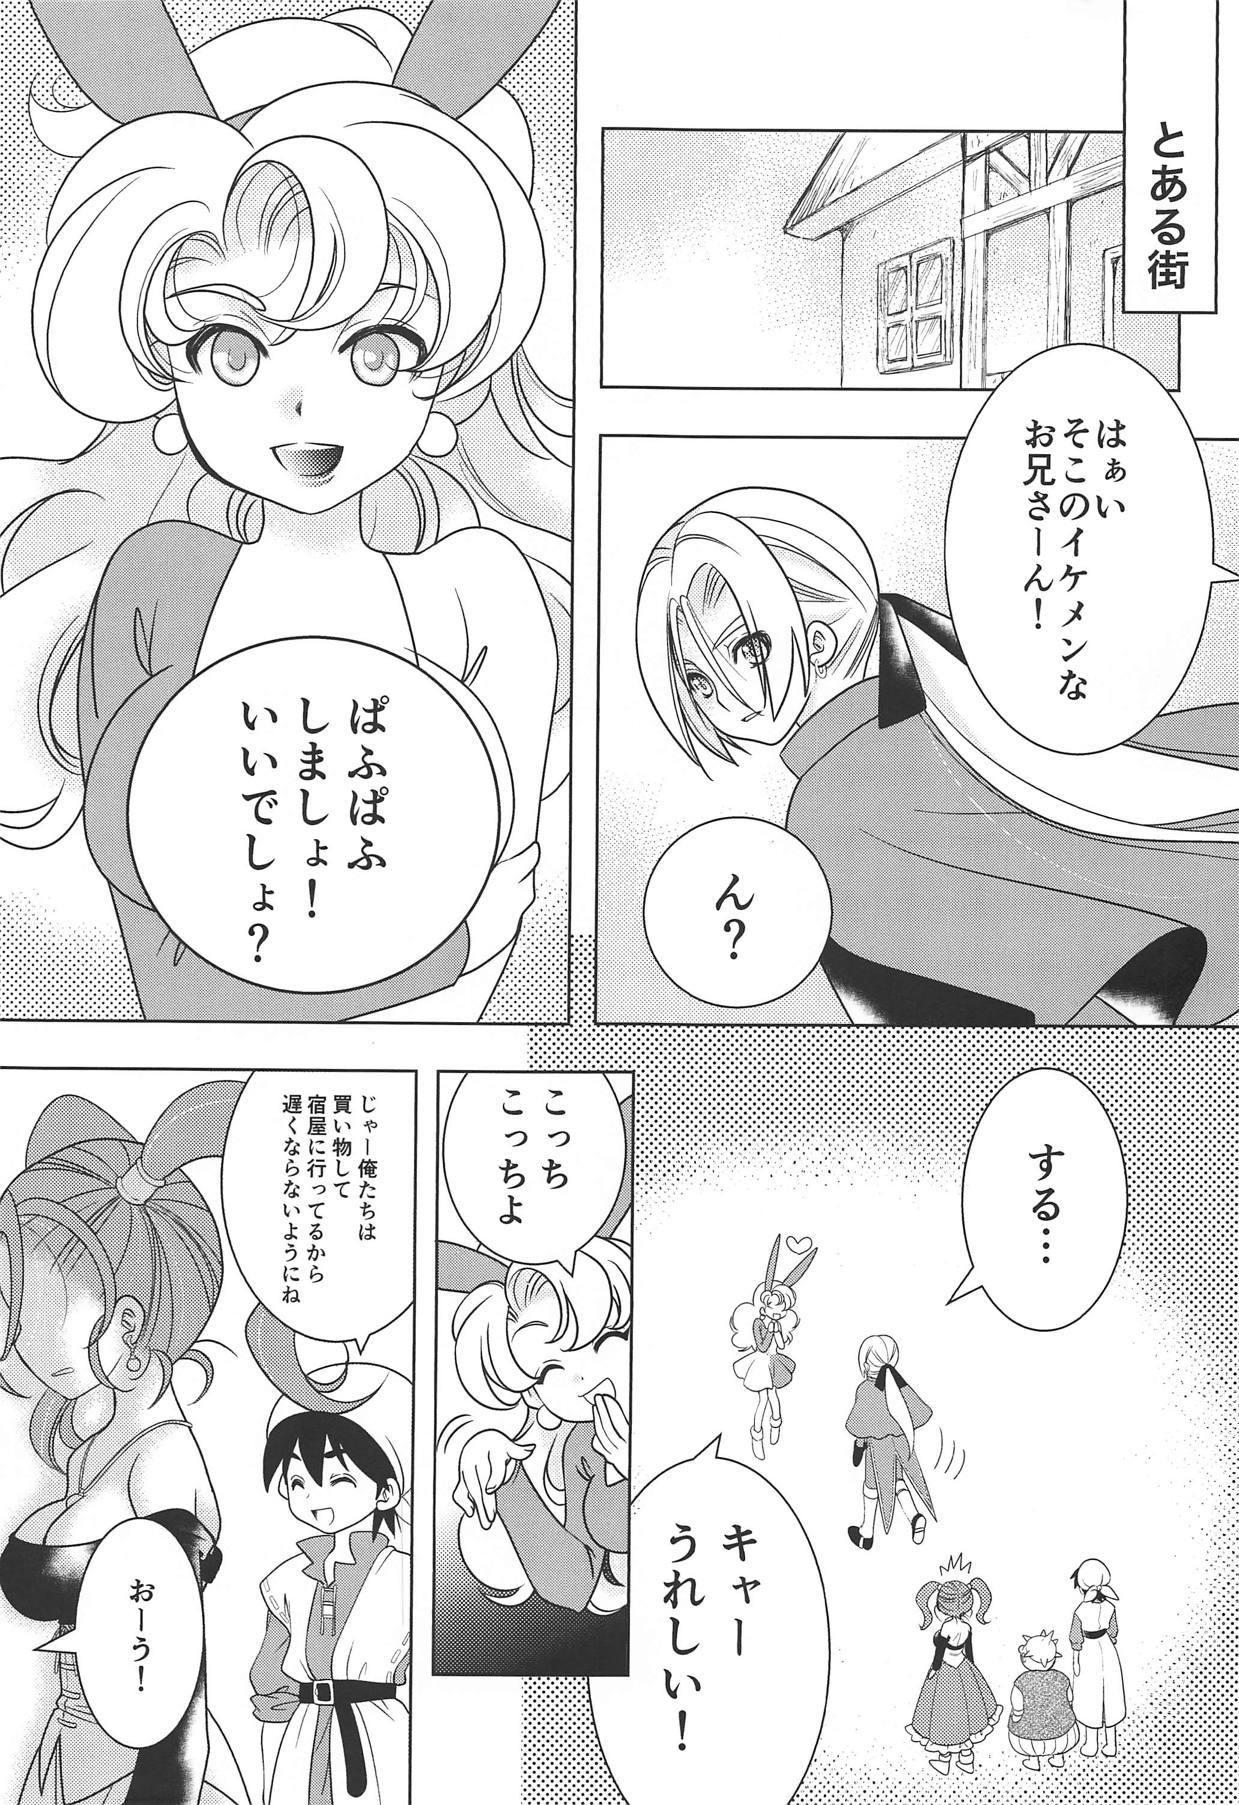 Storyline Missing - Dragon quest viii Hotwife - Page 2